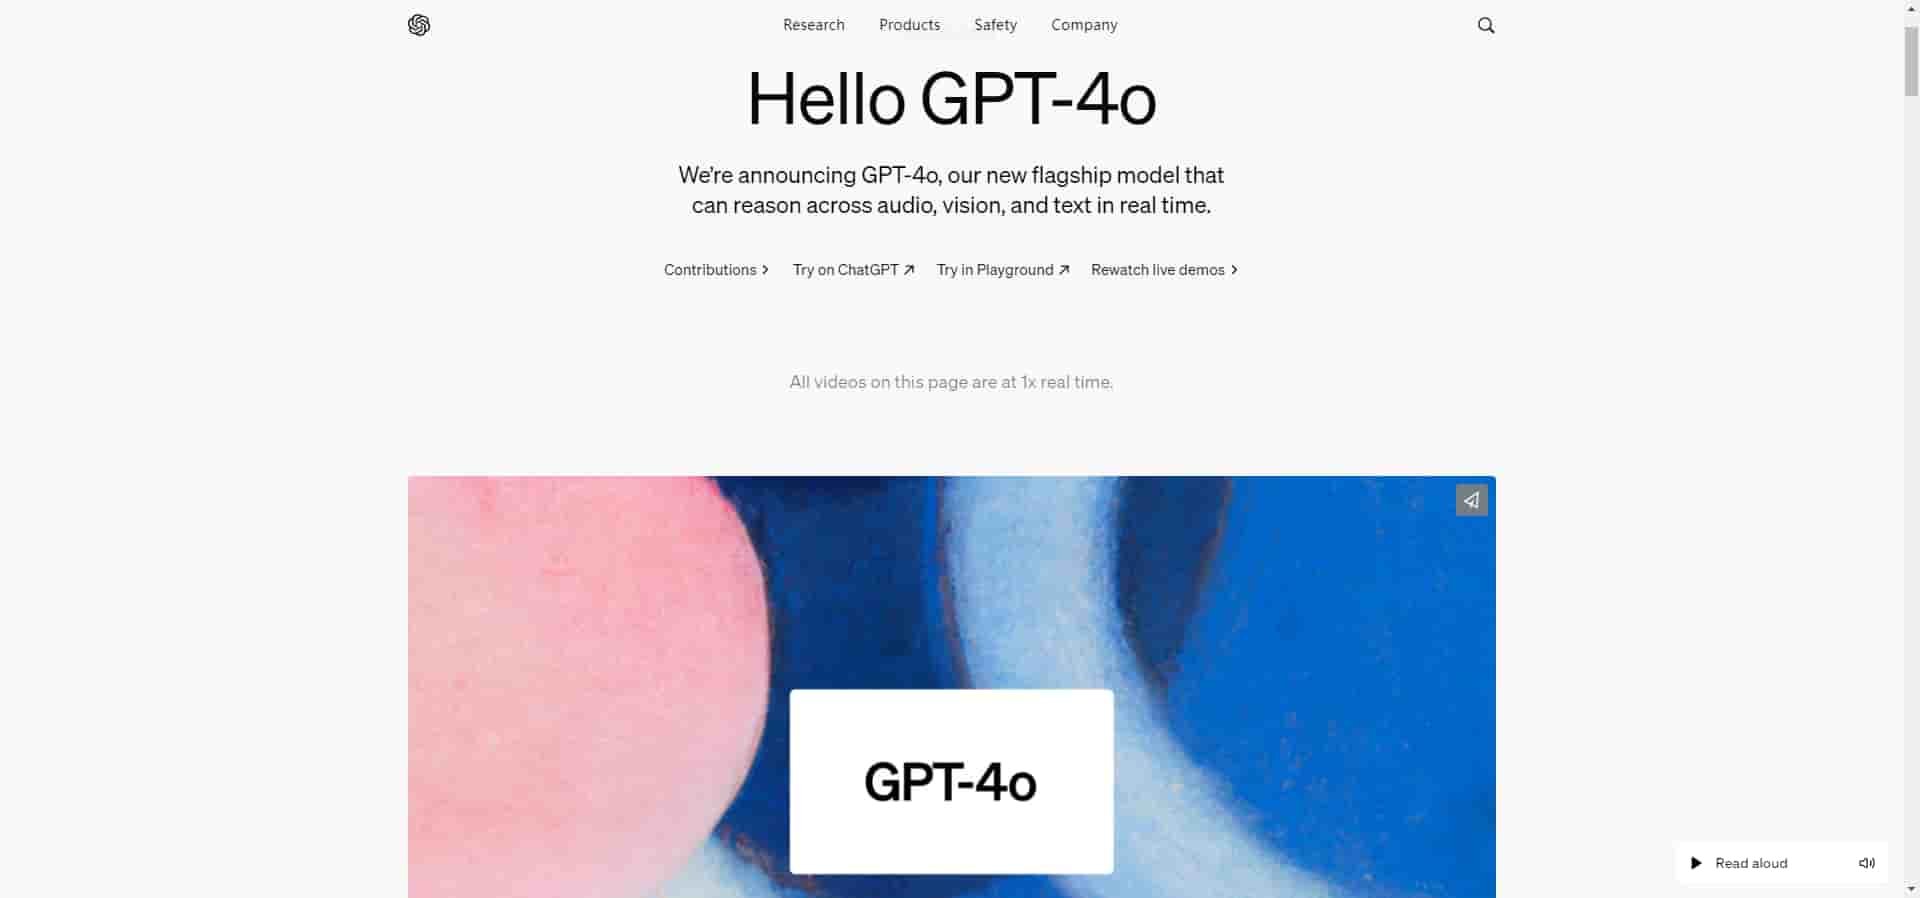 GPT-4o - GPT-4o is a new type of language model developed by OpenAI. This model uses modalities such as voice filtering and behavior adjusting to provide a superior user experience.